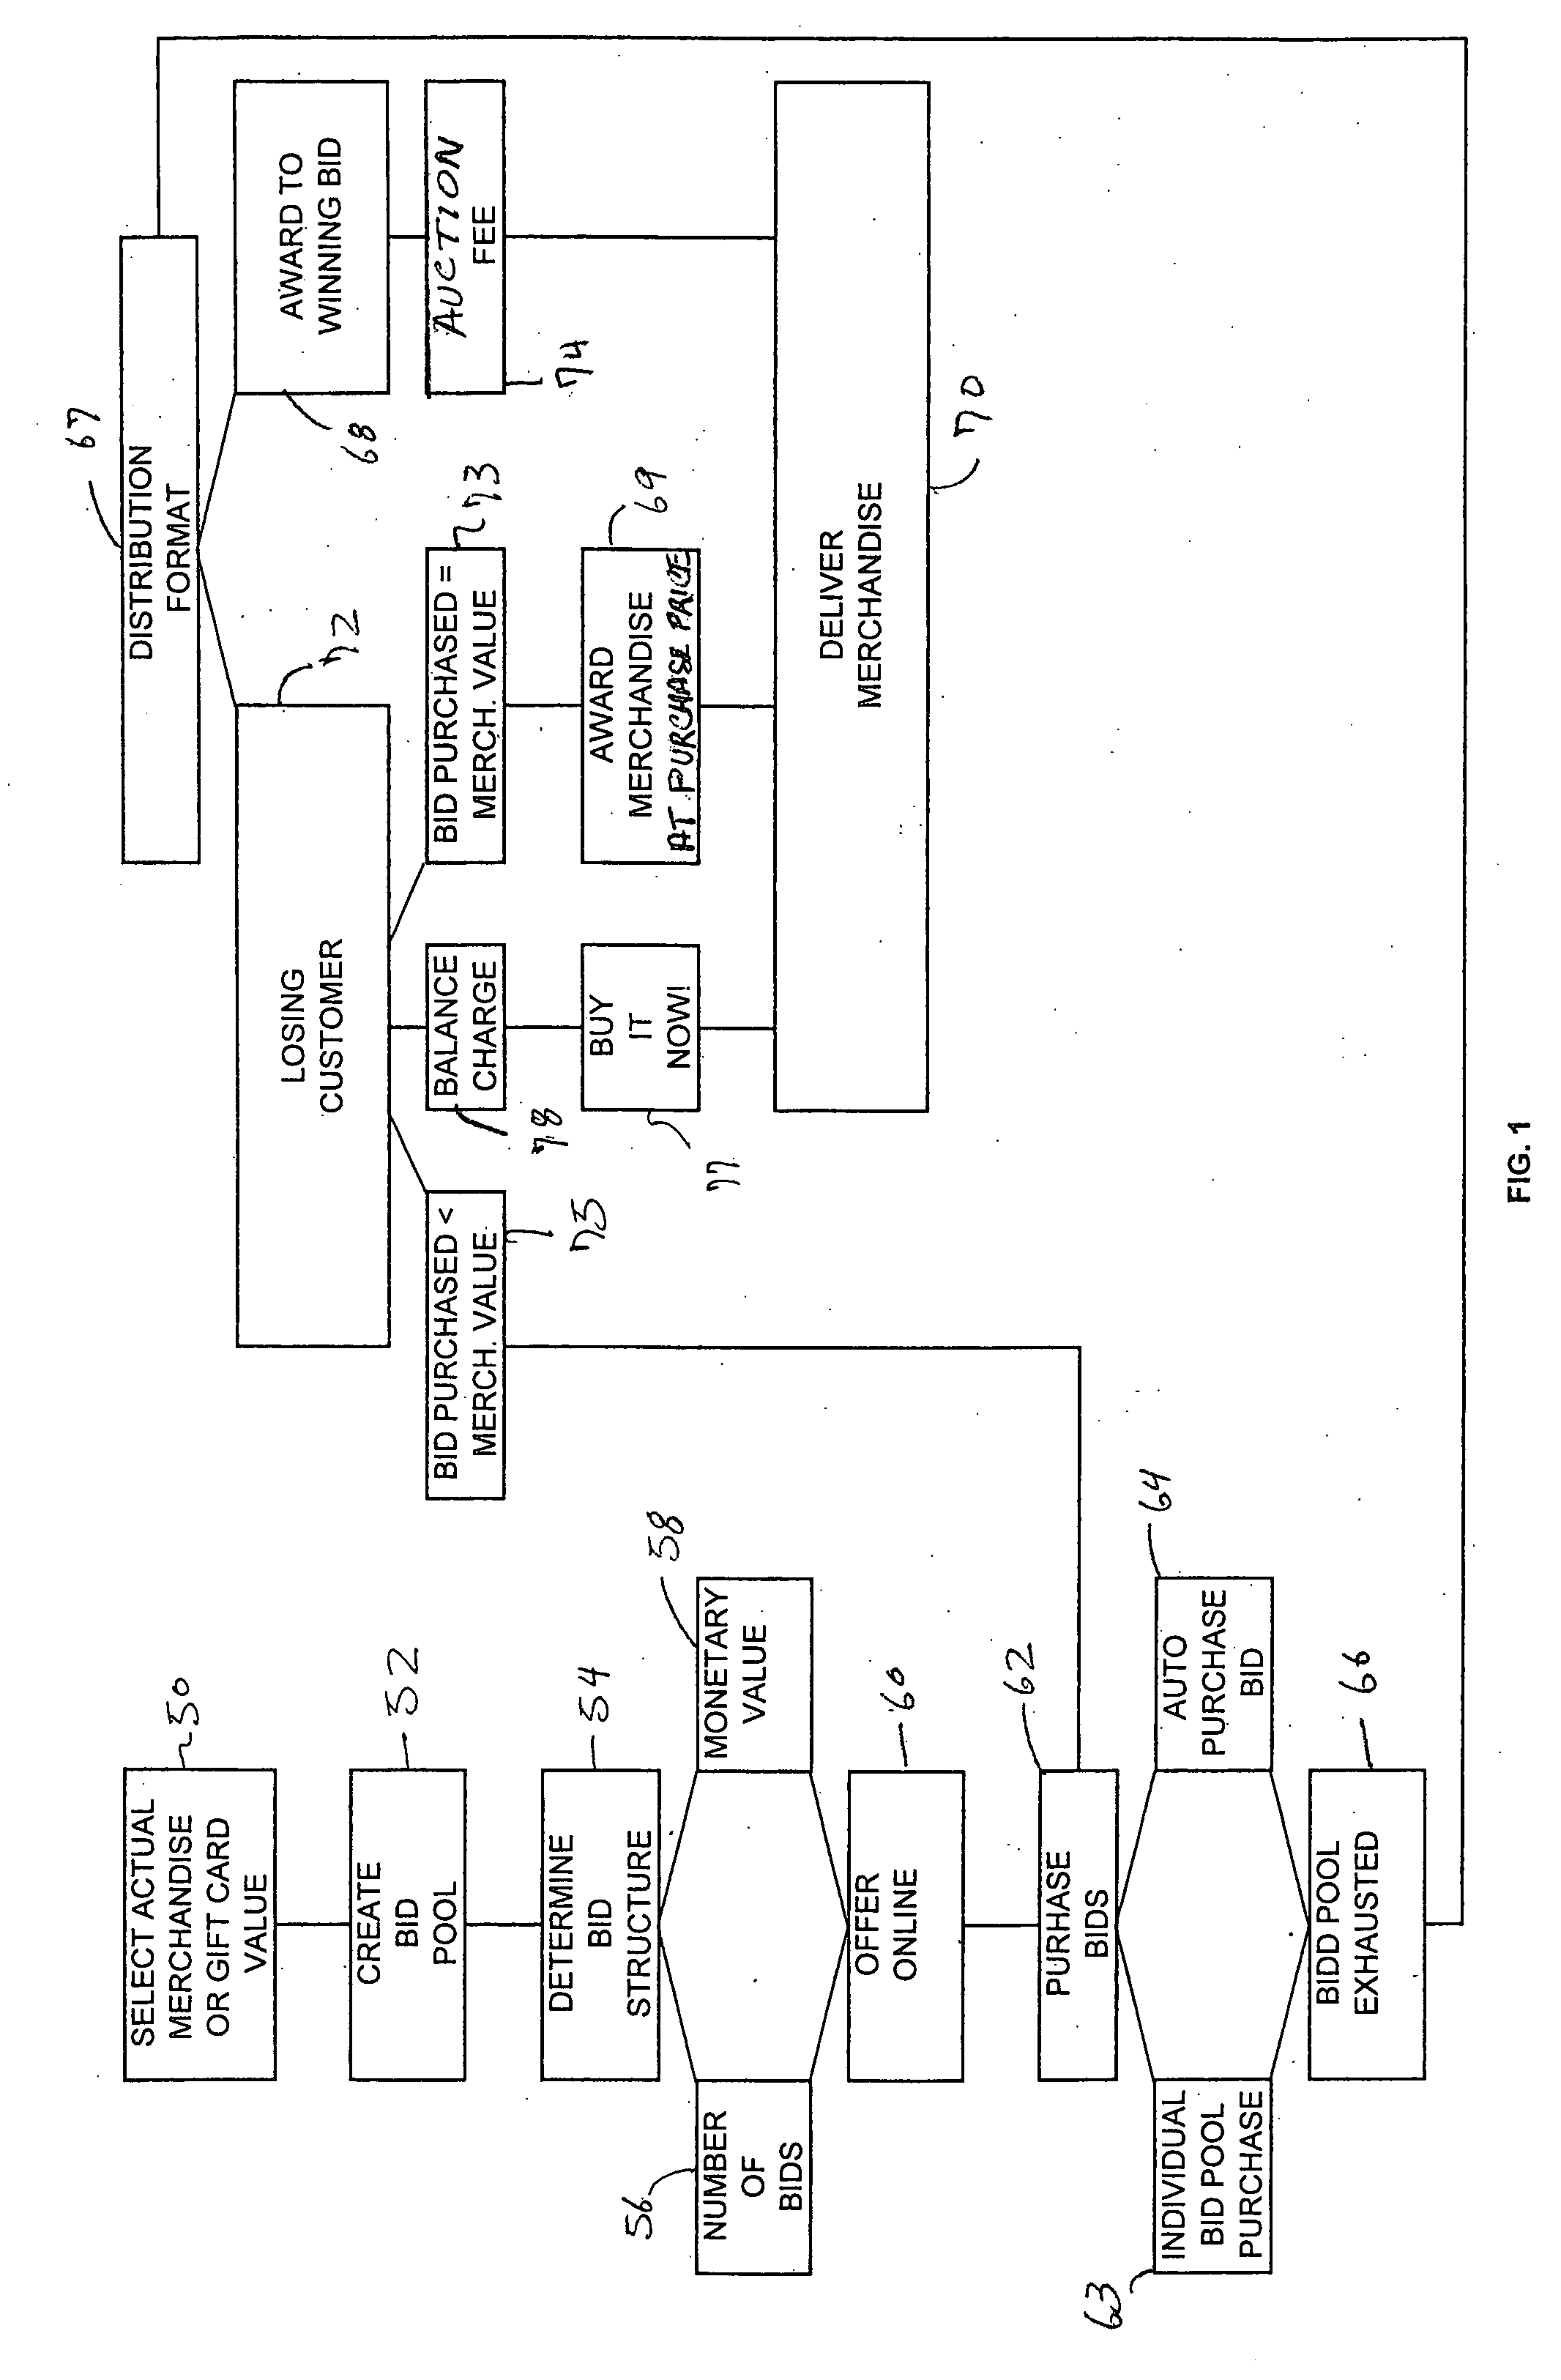 System and method of on-line merchandising